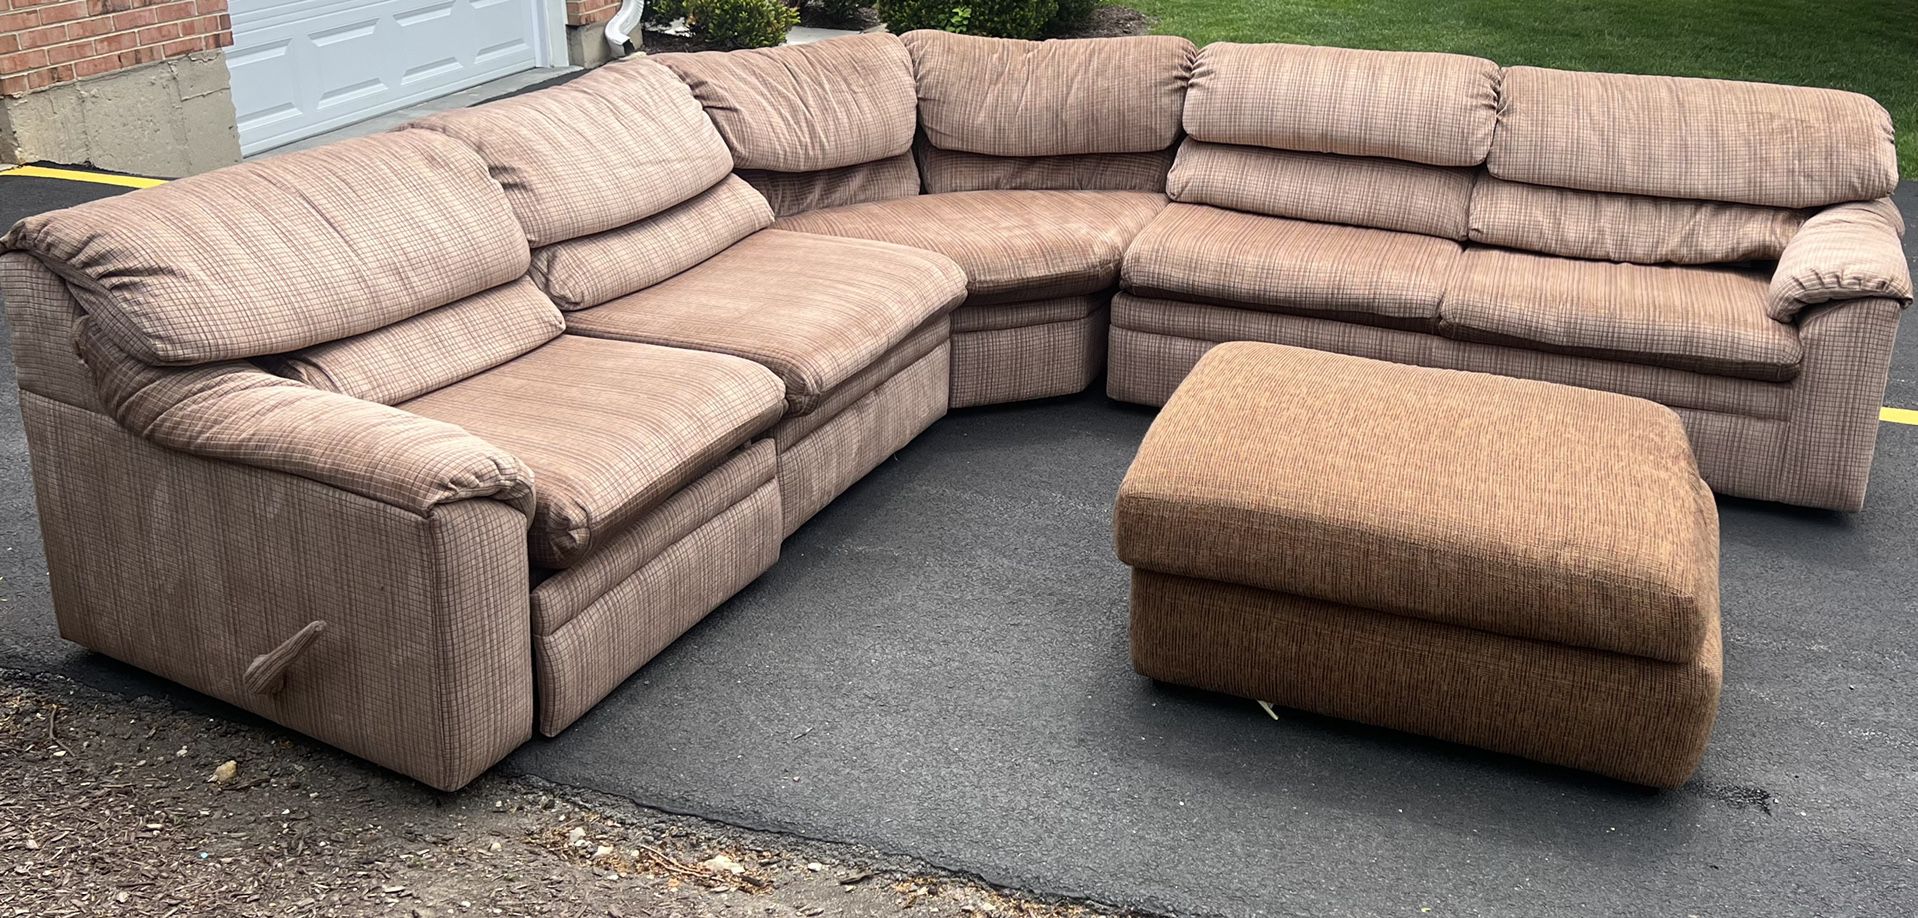 Sectional Couch Set With Pull Out Bed And Ottoman 